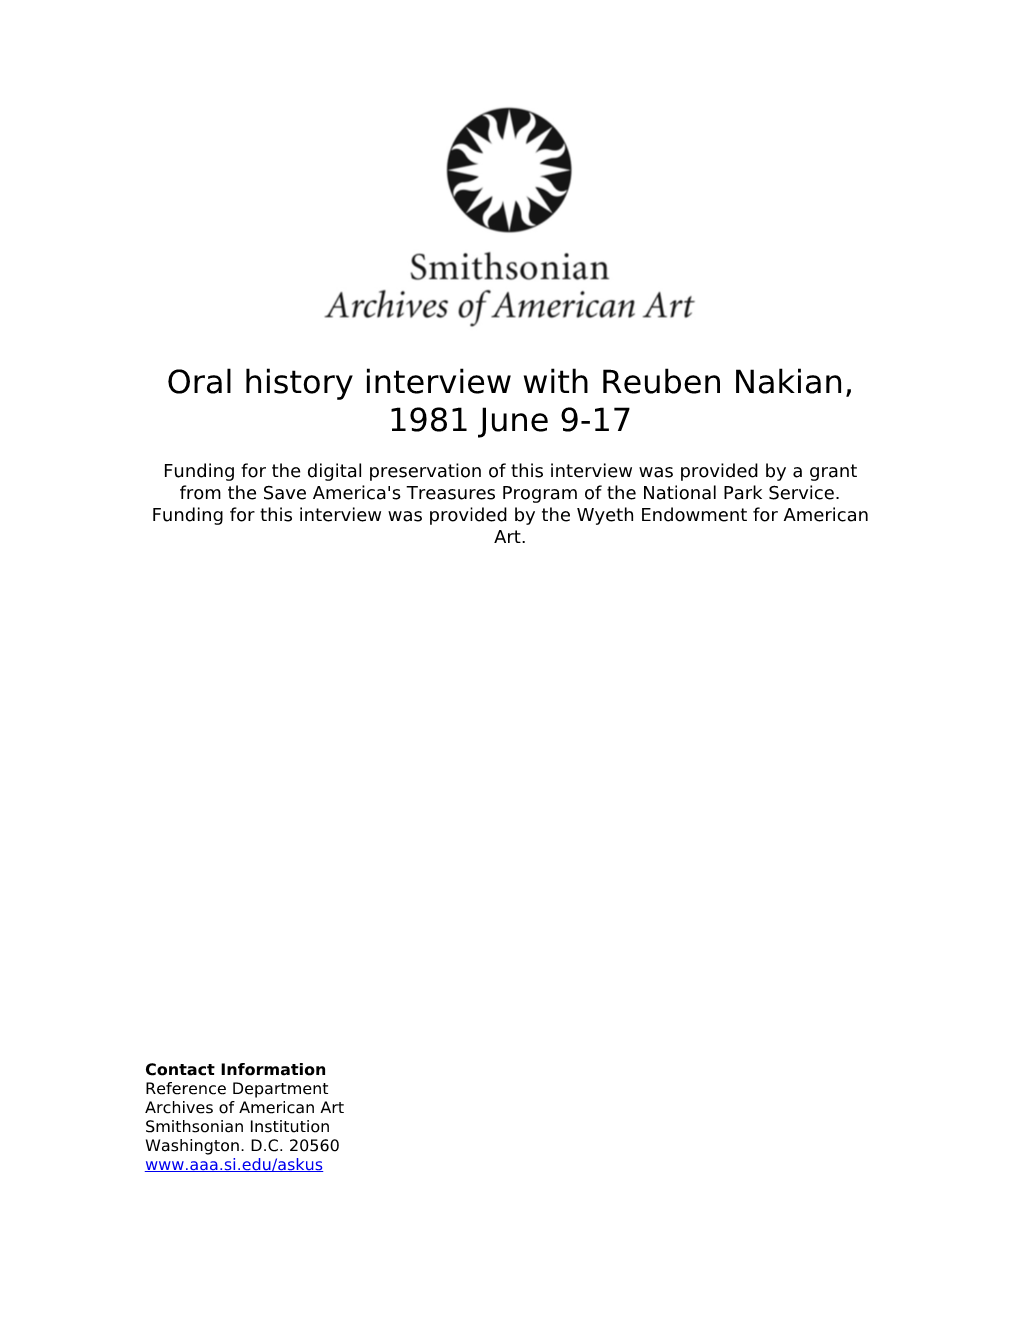 Oral History Interview with Reuben Nakian, 1981 June 9-17